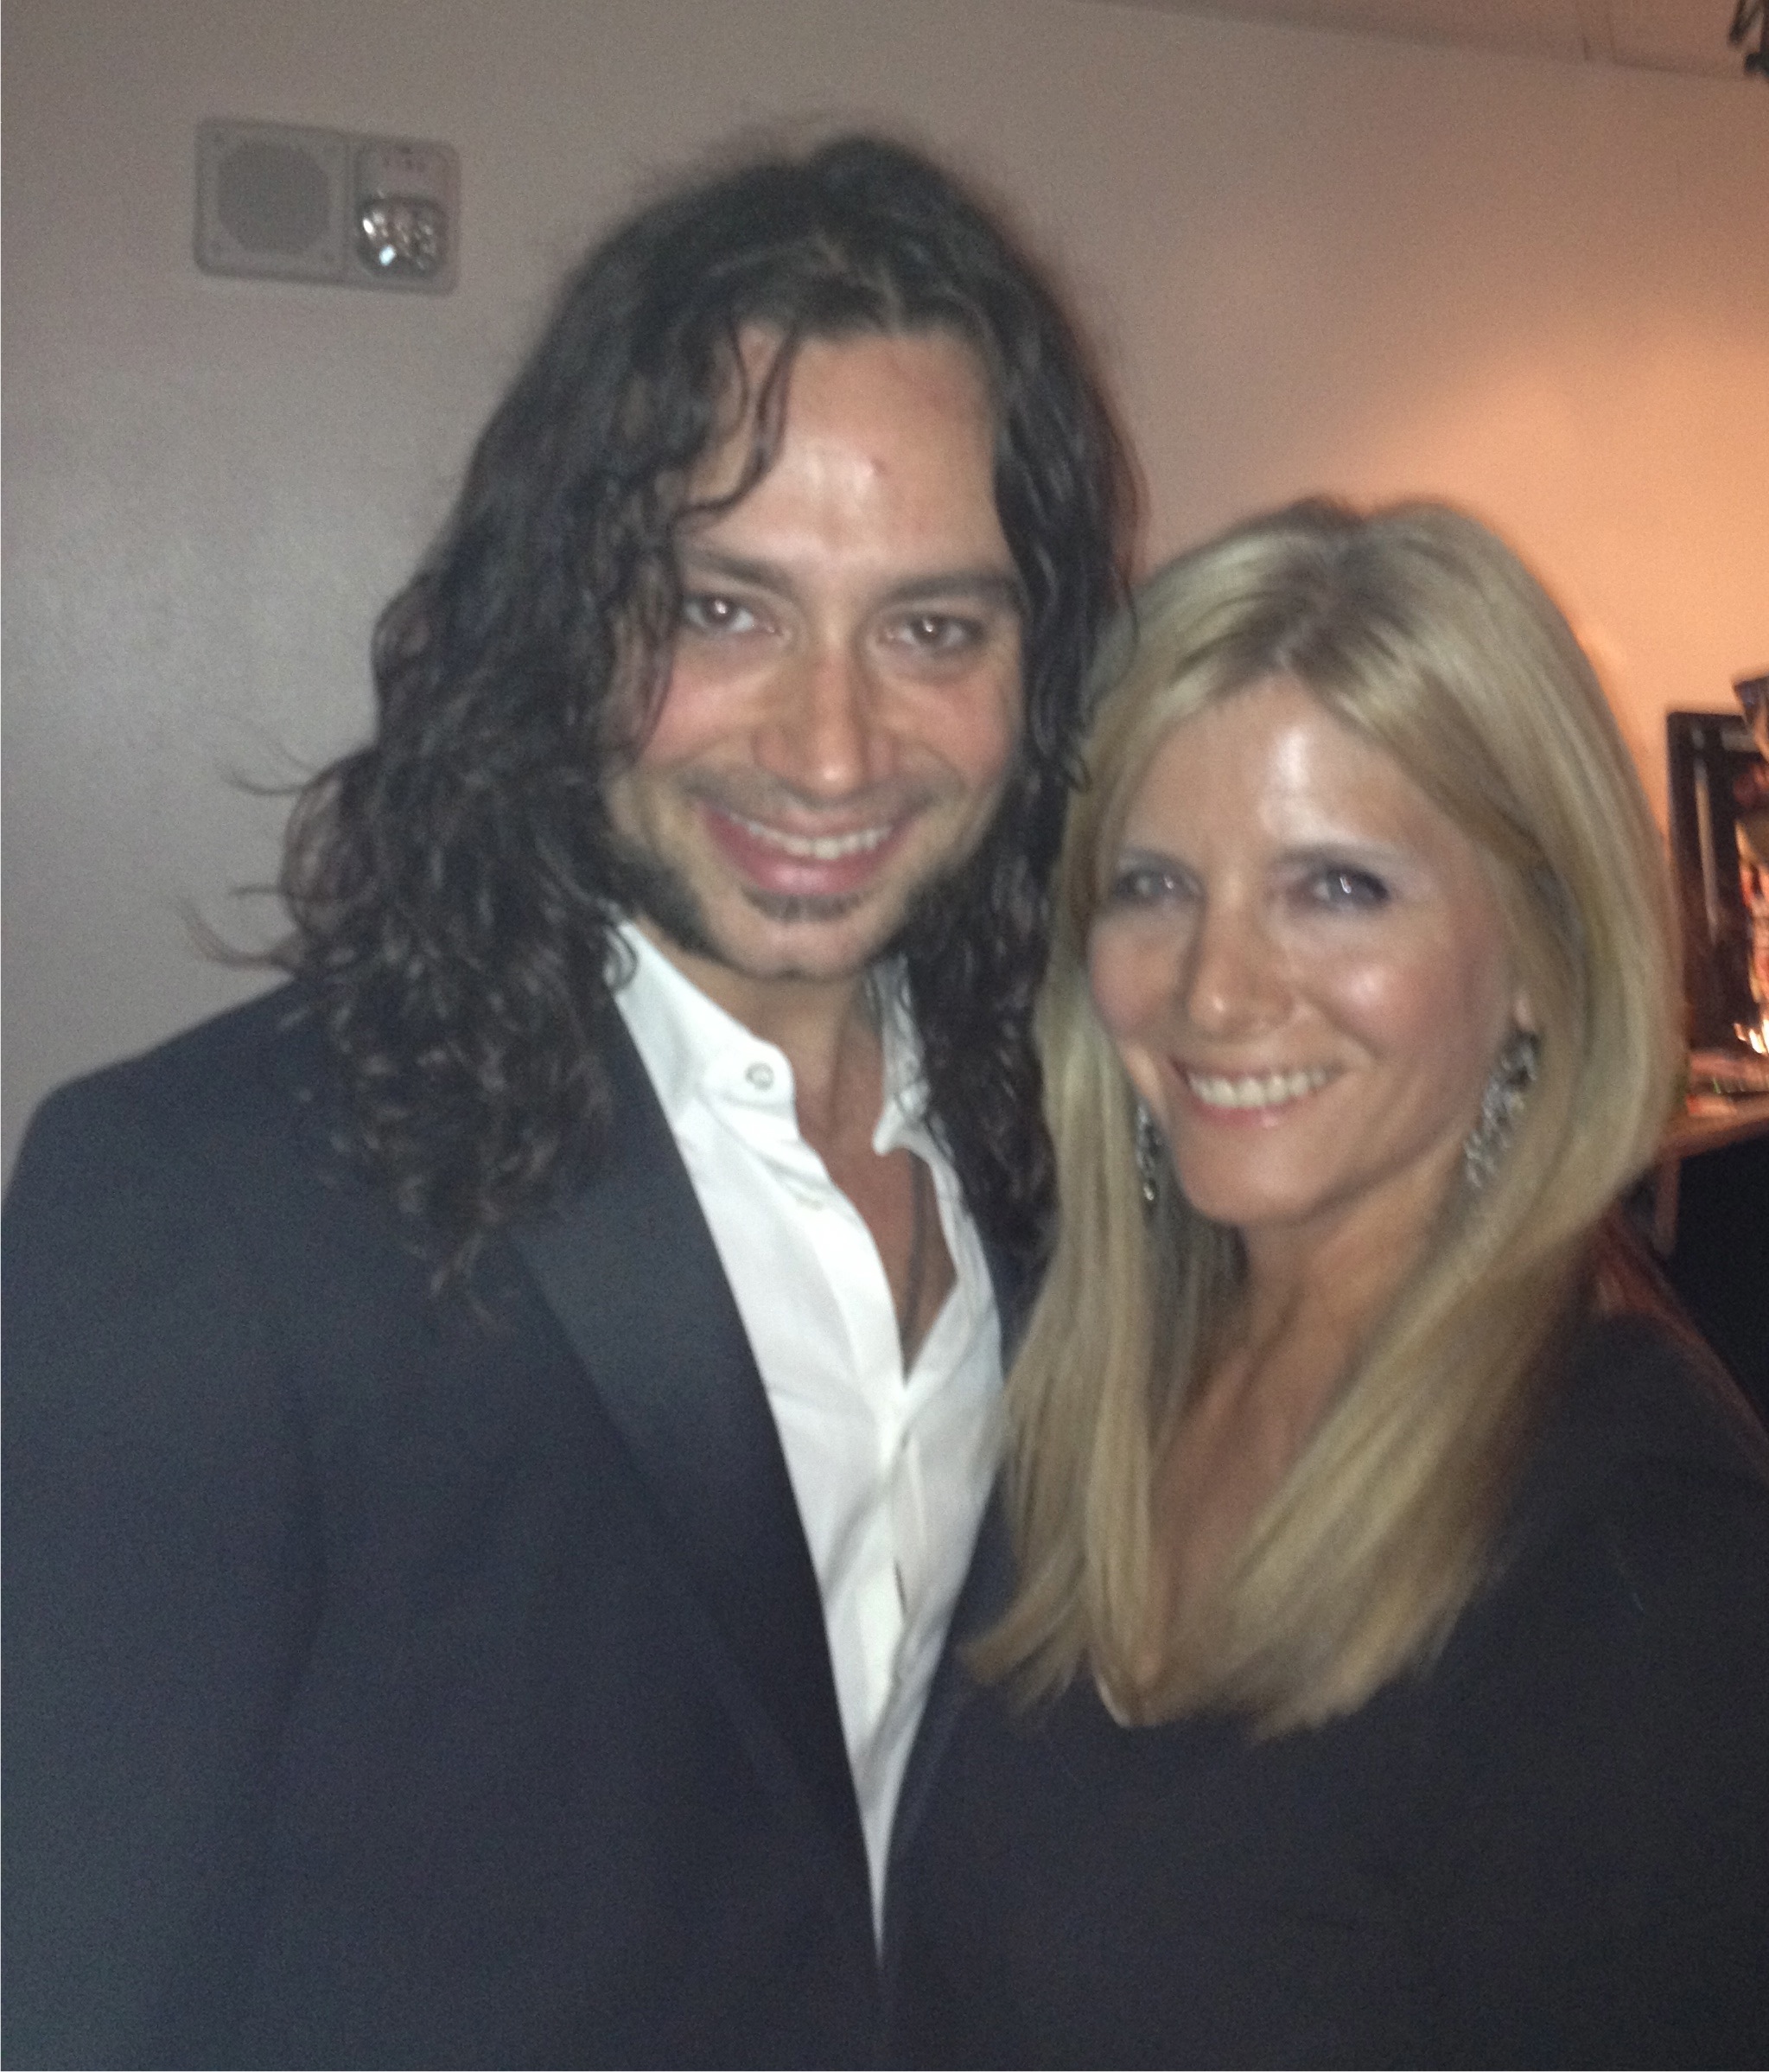 Constantine Maroulis/Beth Laufer Jekyll & Hyde Musical Broadway Marquis Theater May 2013